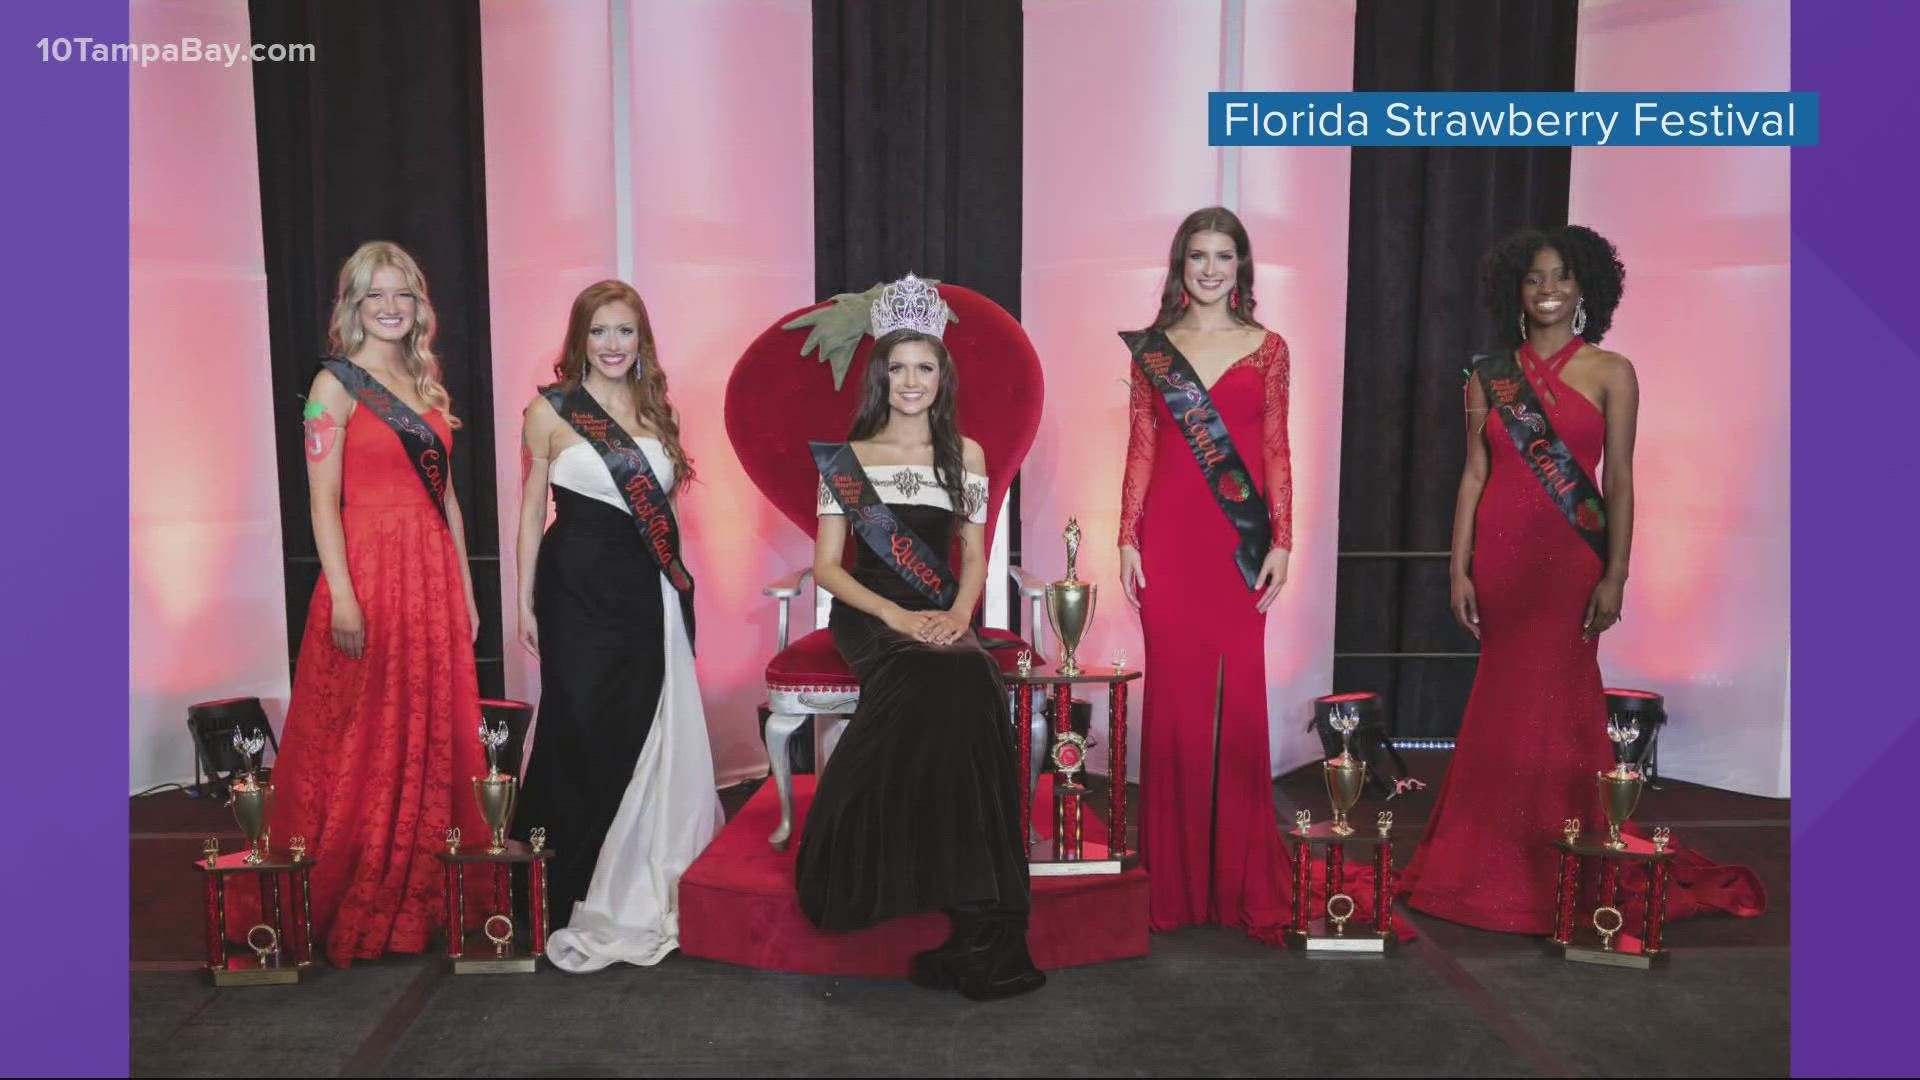 The Strawberry Queen Pageant took place on Saturday, Jan. 22.